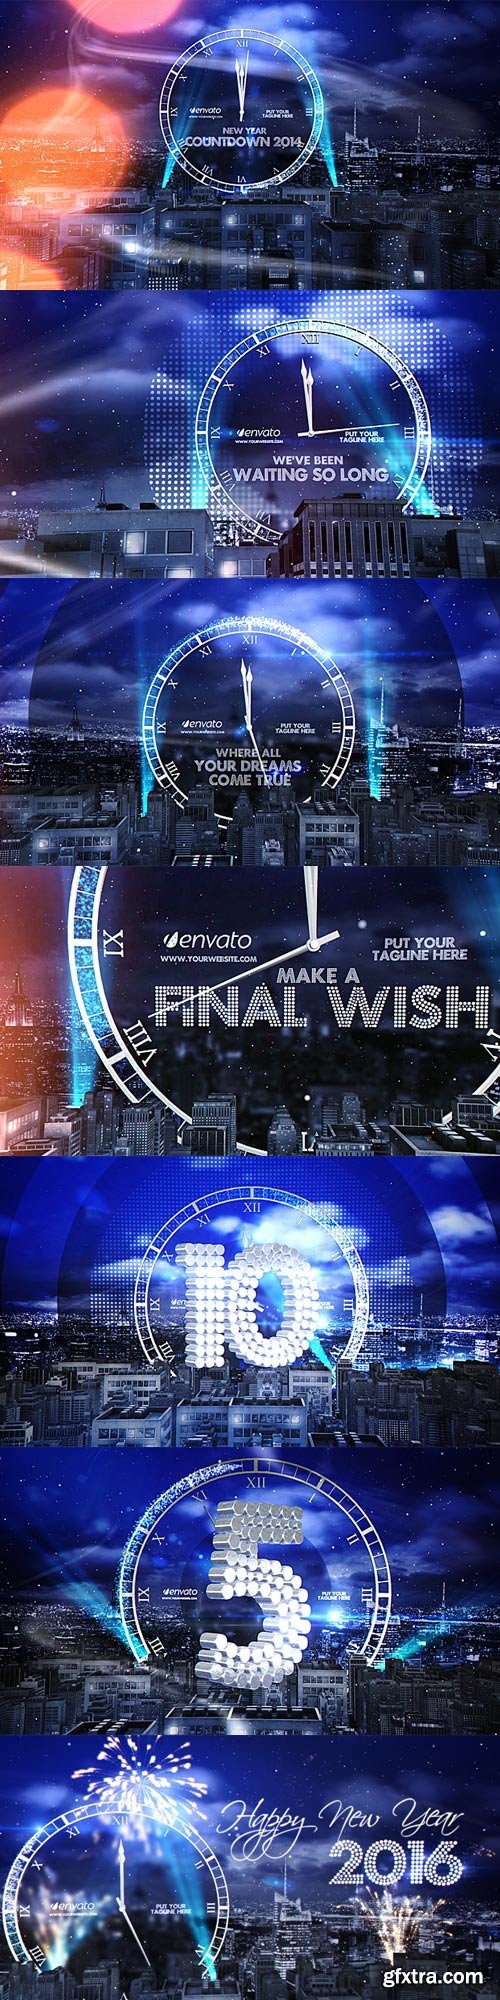 Videohive - New Year Eve Countdown 2019 - 6211072